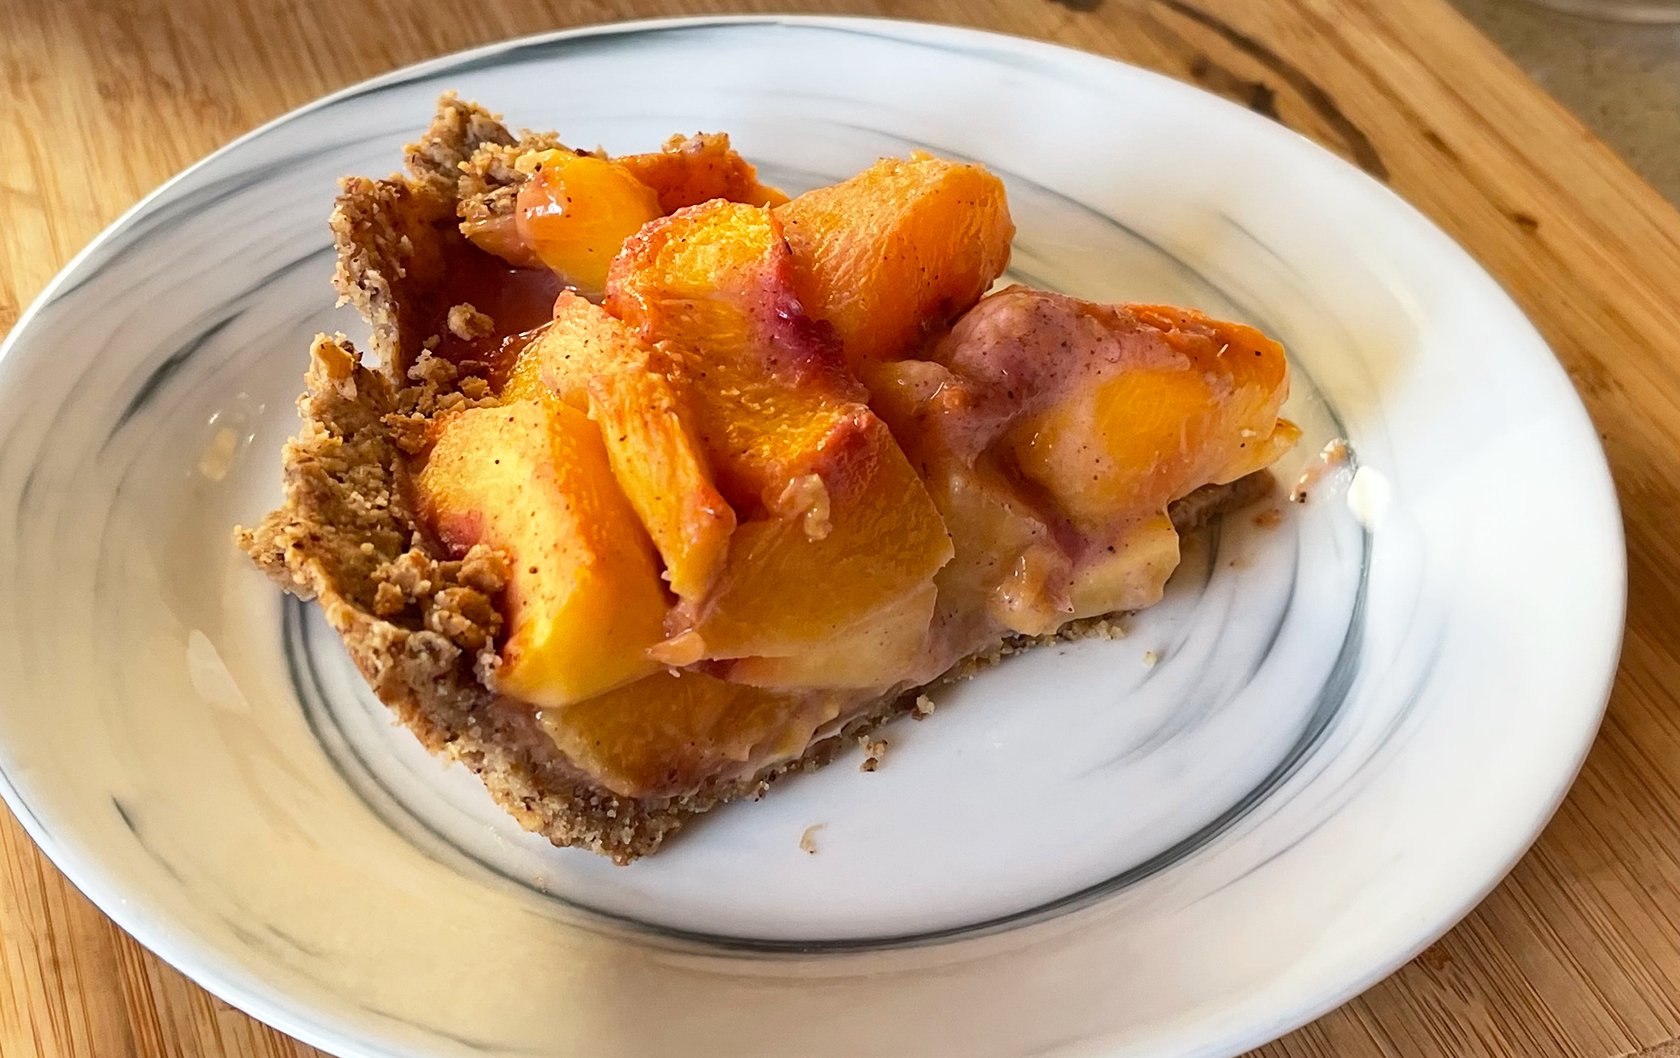 Recipe for a Delicious Peach Pie with Toasted Hazelnut Crust